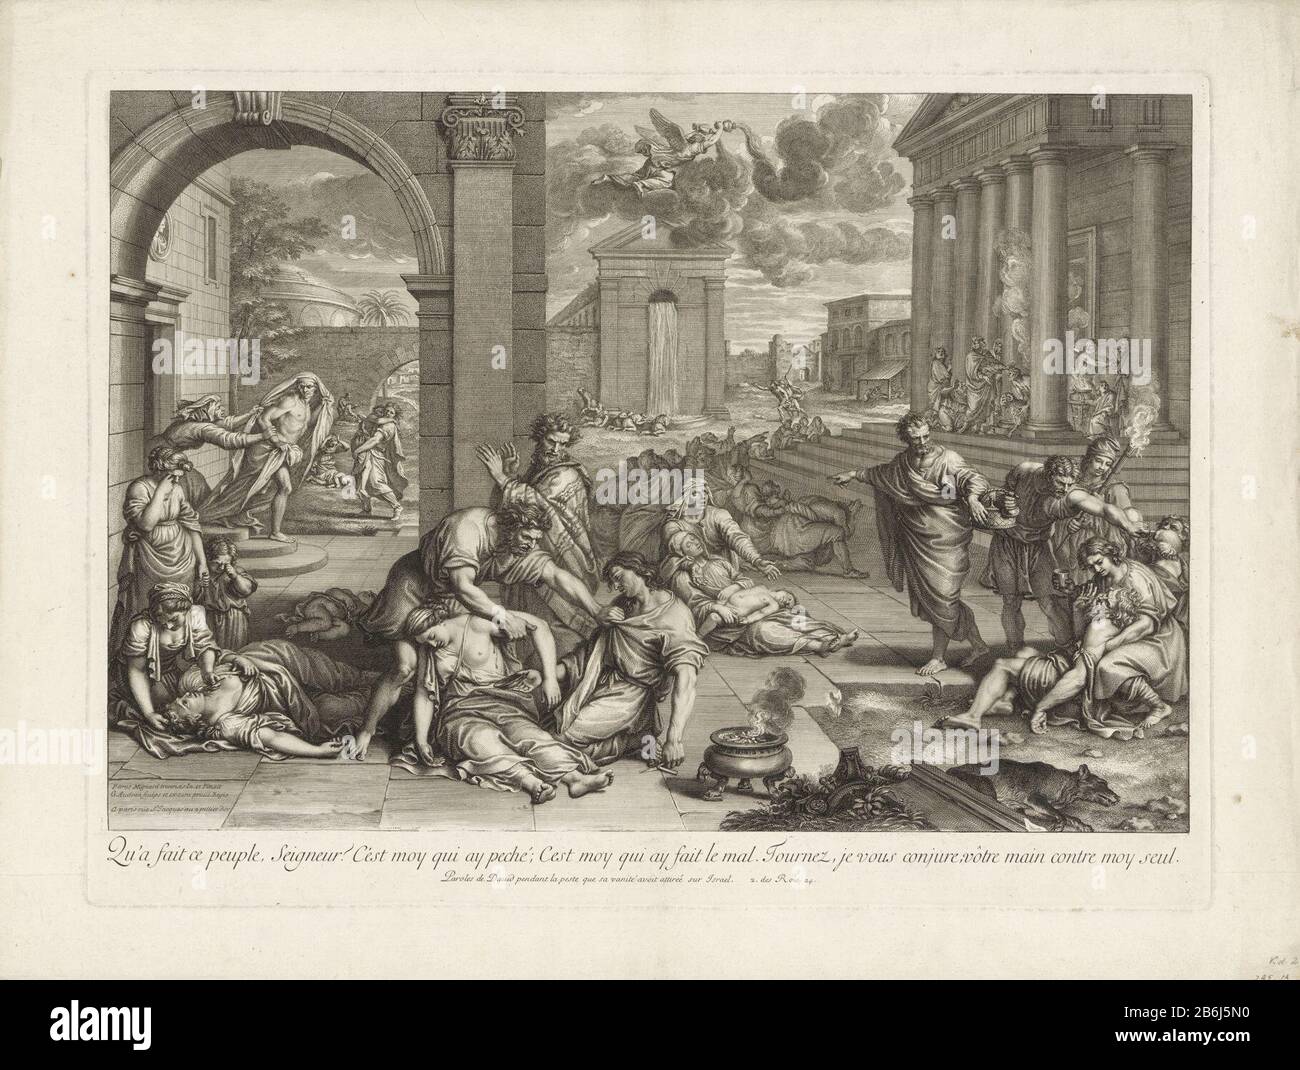 Fish Plague object type: picture Item number: RP-P-OB-70.420Catalogusreferentie: IFF 61 Manufacturer : printmaker: Gérard Audrannaar painting: Pierre Mignard (1612-1695) Editor: Gérard AudranPlaats manufacture: France Date: 1650 - 1703 Physical characteristics: etching and engra material: paper Technique: etching / engra (printing process) Dimensions: h 530 mm × W 720 mm Stock Photo